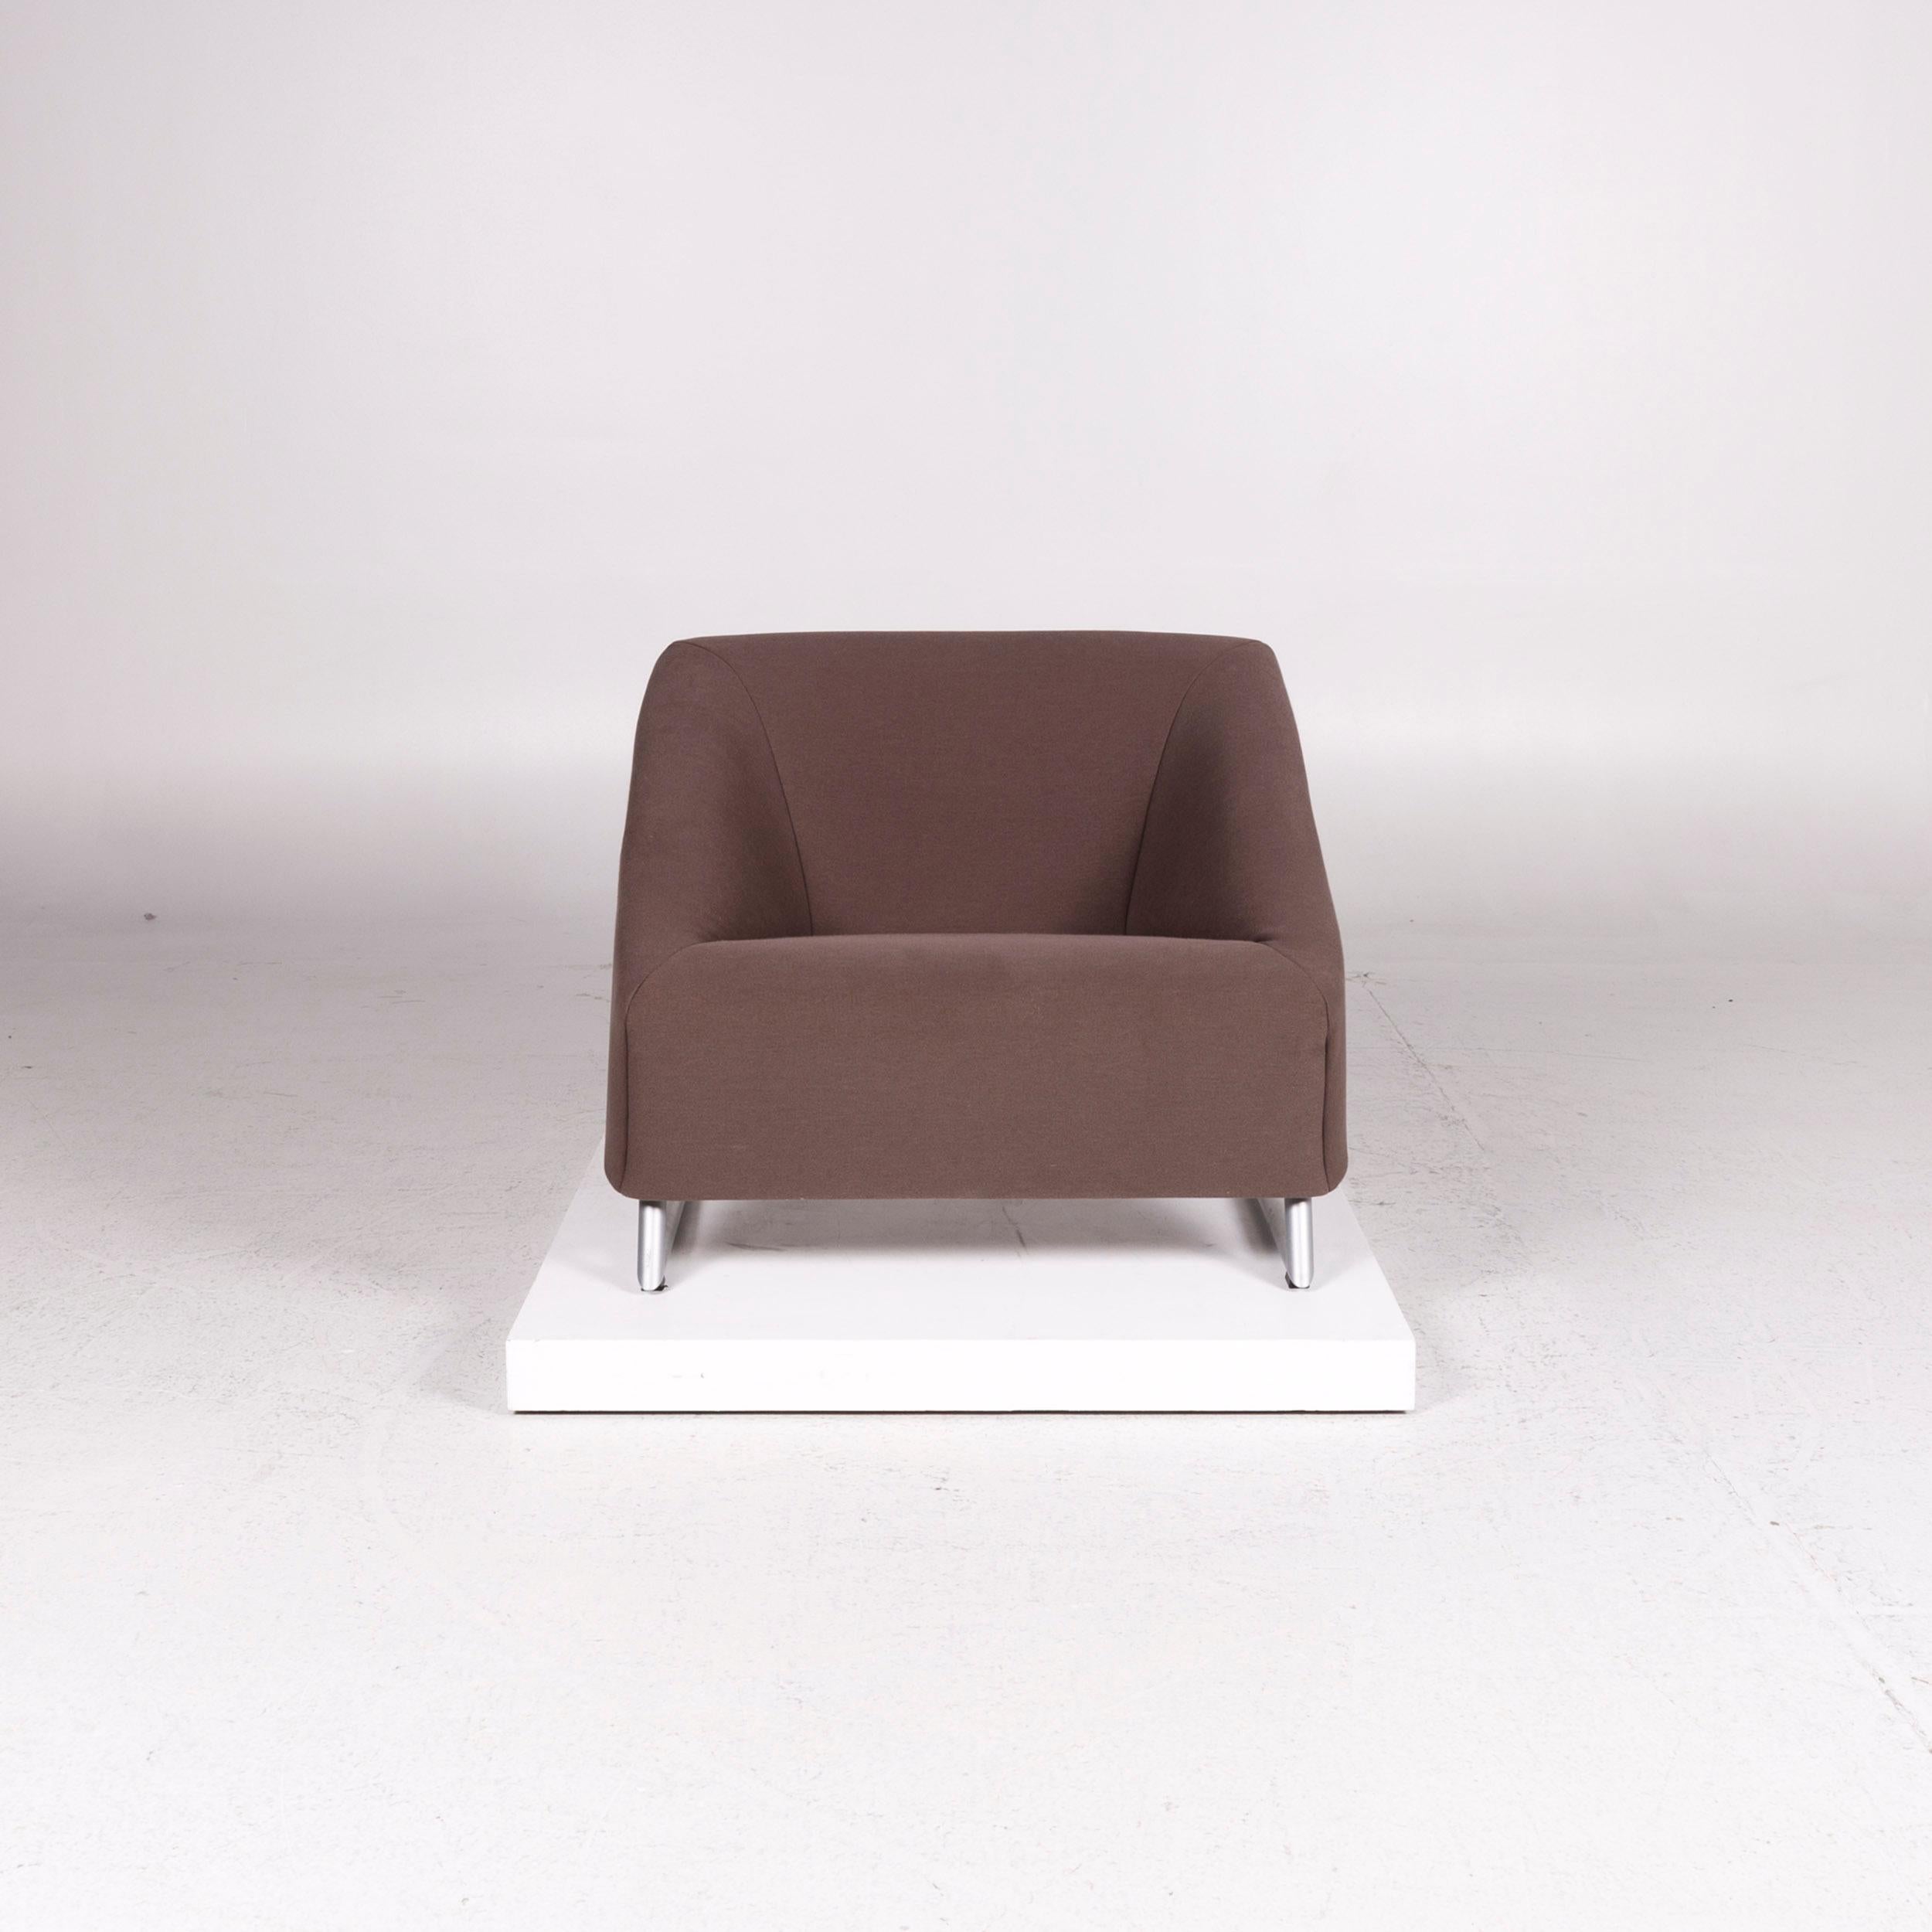 We bring to you a Rolf Benz freestyle fabric armchair brown.
 SKU: #12120
 

 Product Measurements in centimeters:
 

 depth: 89
 width: 91
 height: 71
 seat-height: 41
 rest-height: 58
 seat-depth: 50
 seat-width: 51
 back-height: